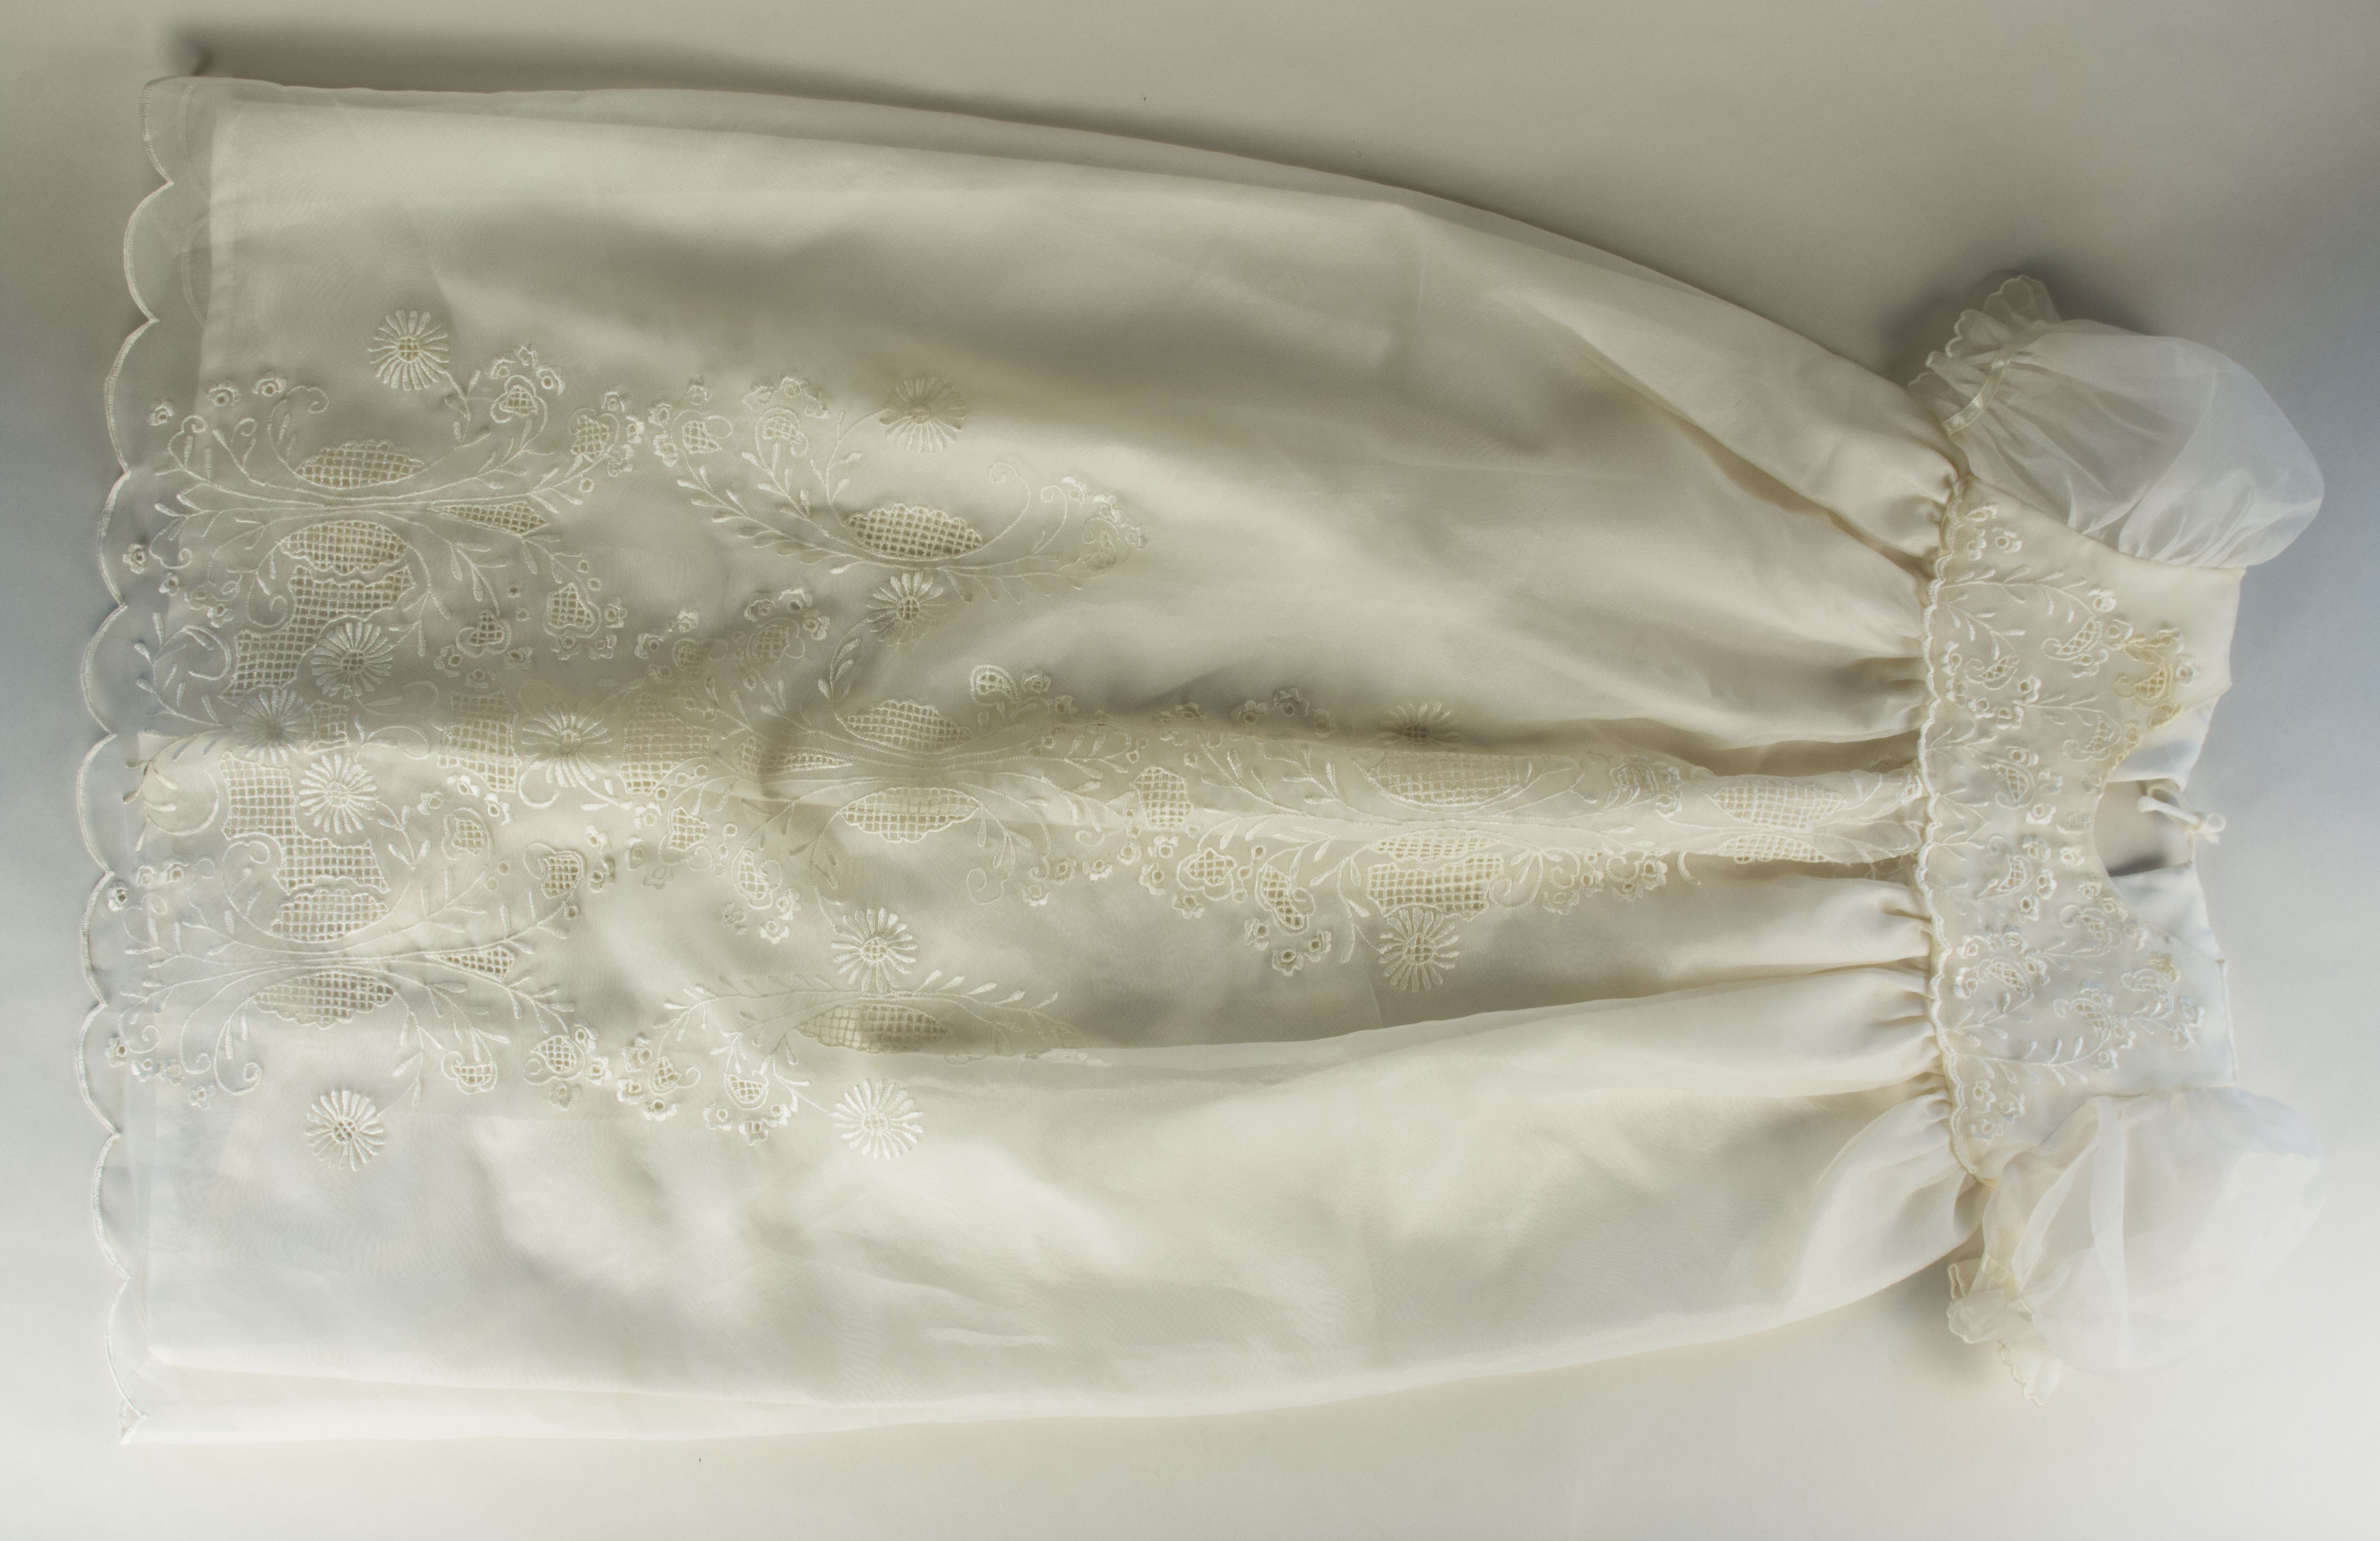 Baptism gown owned by Claudia Jamilla- front viewDaughter’s baptismal gown from 1997. Claudia  noted that this was probably made in southern Luzon. It was a gift from mother-in-law [the mother of Claudia’s husband; Stephanie’s grandfather. Symbolizes daughter’s [Stephanie’s] birth. Any views, findings, conclusions, or recommendations expressed in this story do not necessarily represent those of the National Endowment for the Humanities. (c) Field Museum of Natural History - CC BY-NC 4.0